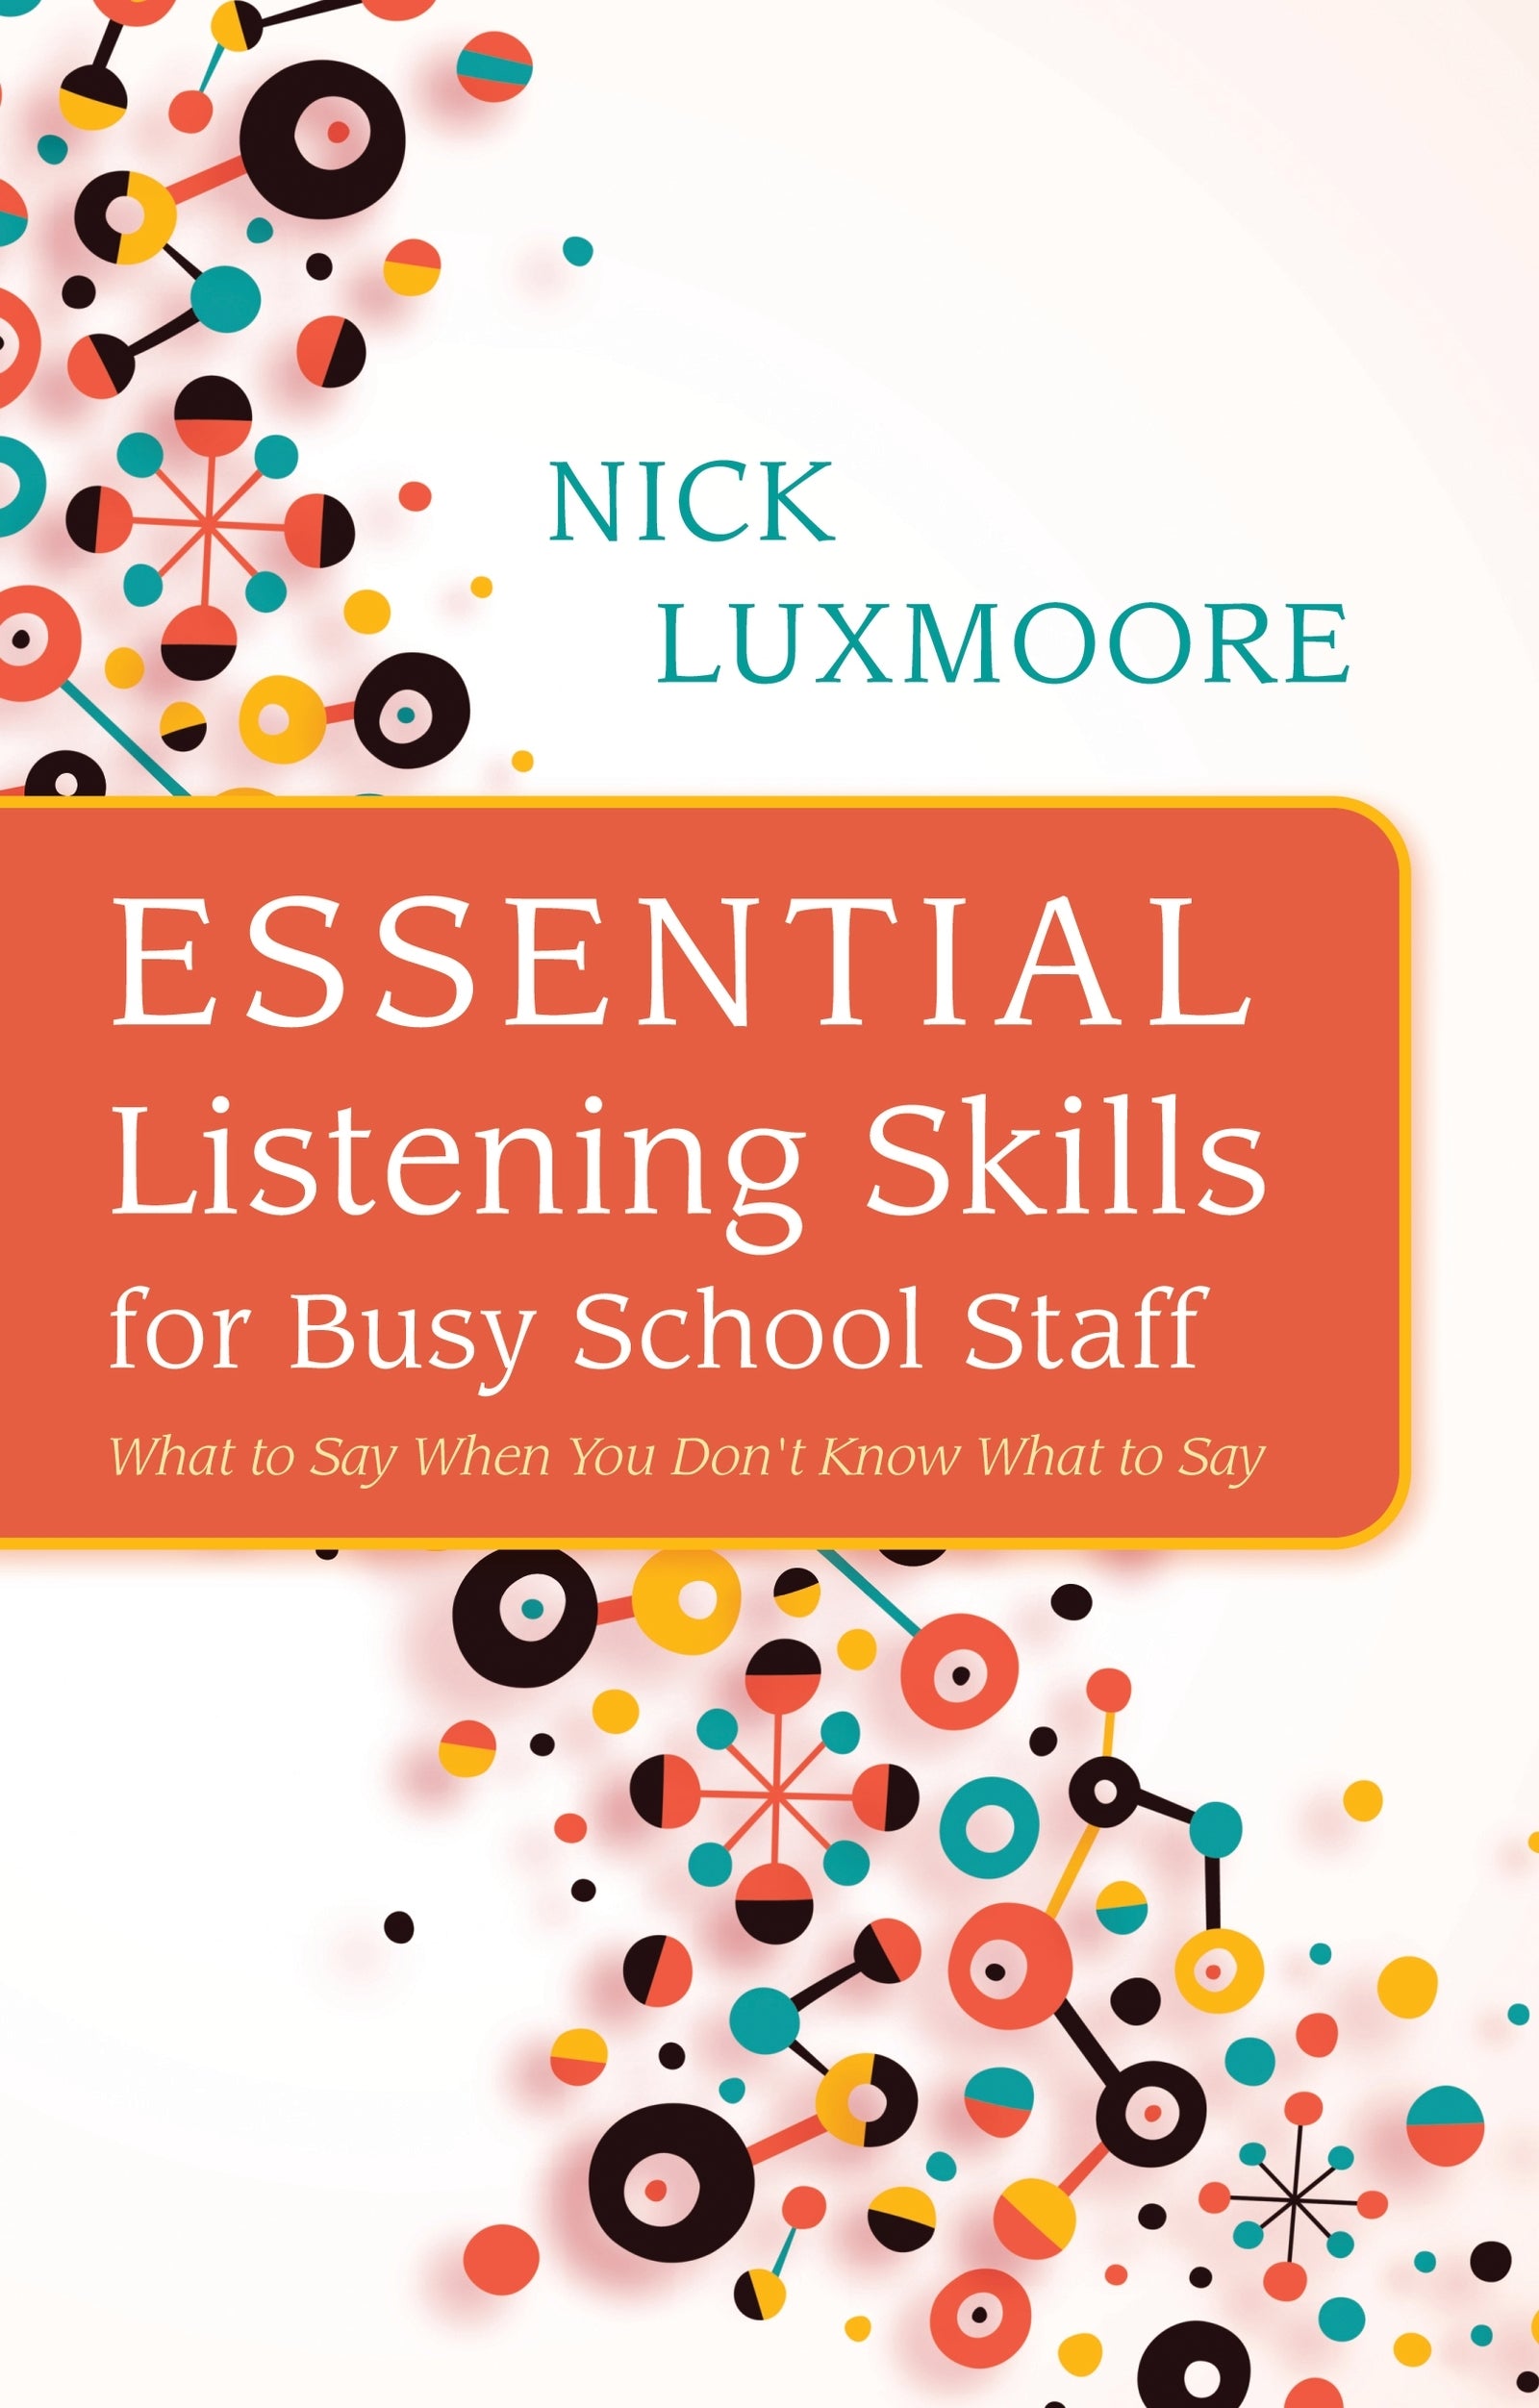 Essential Listening Skills for Busy School Staff by Nick Luxmoore